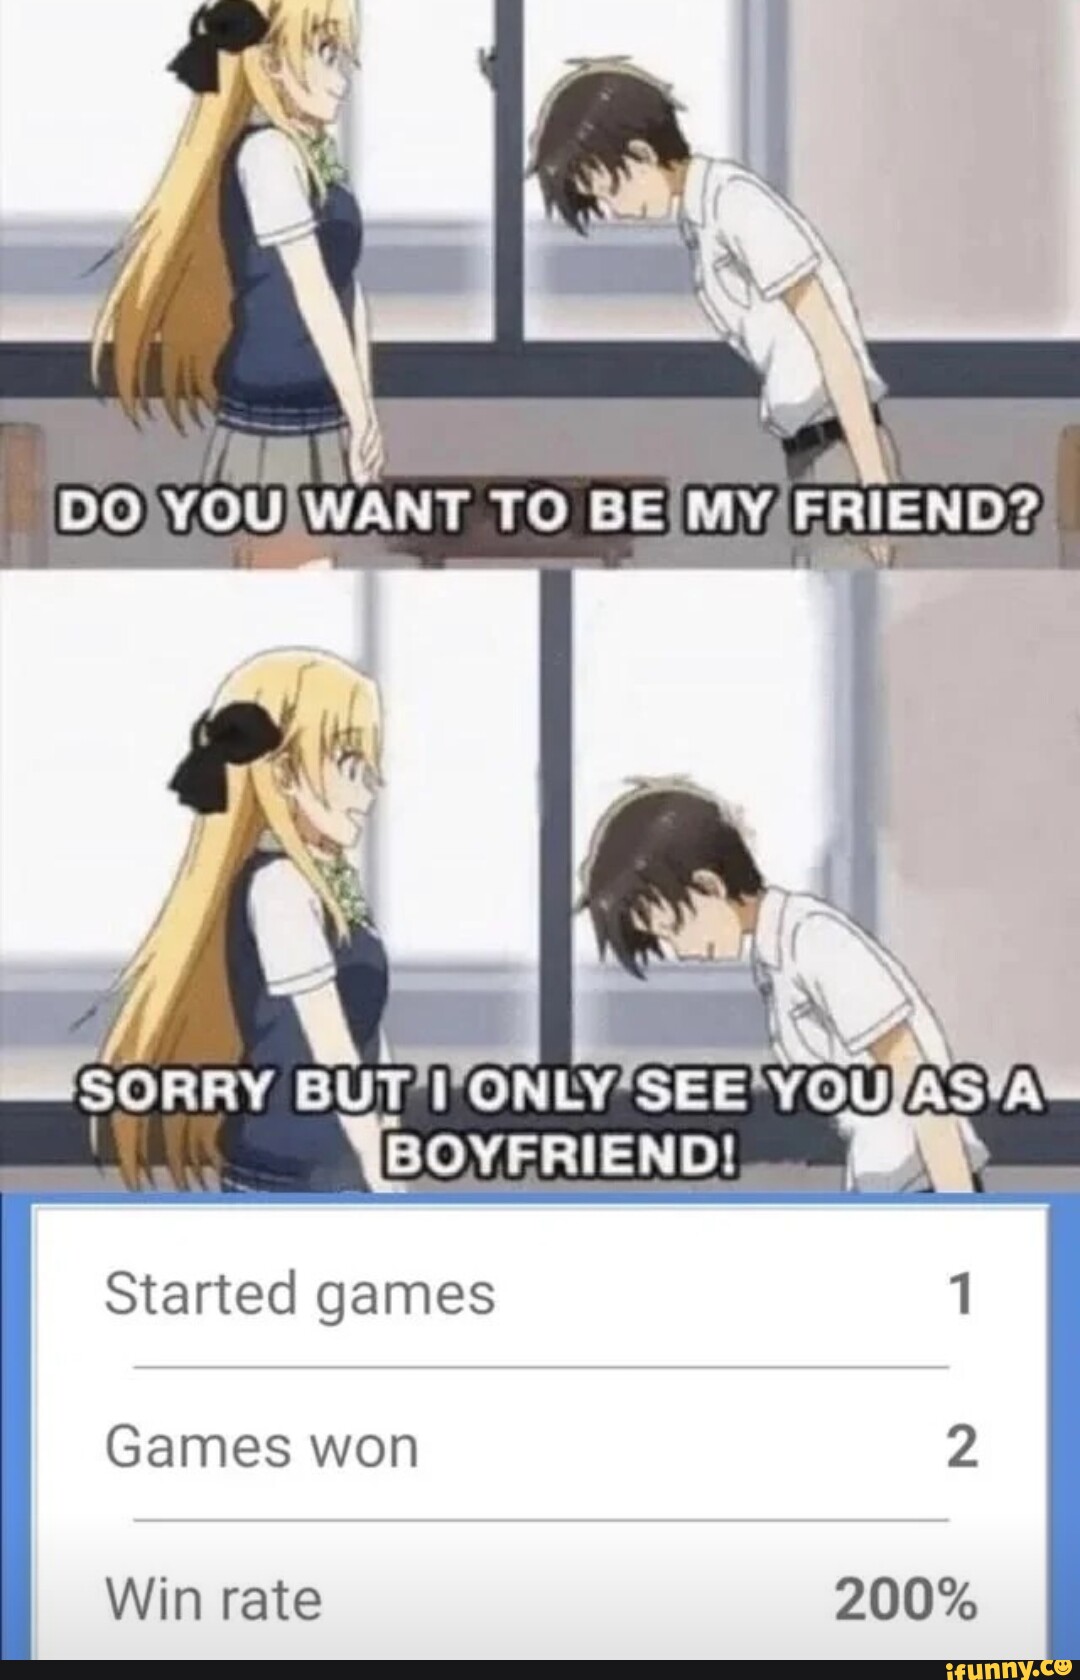 But I Just Want to Be Friends - Cartoons & Anime - Anime